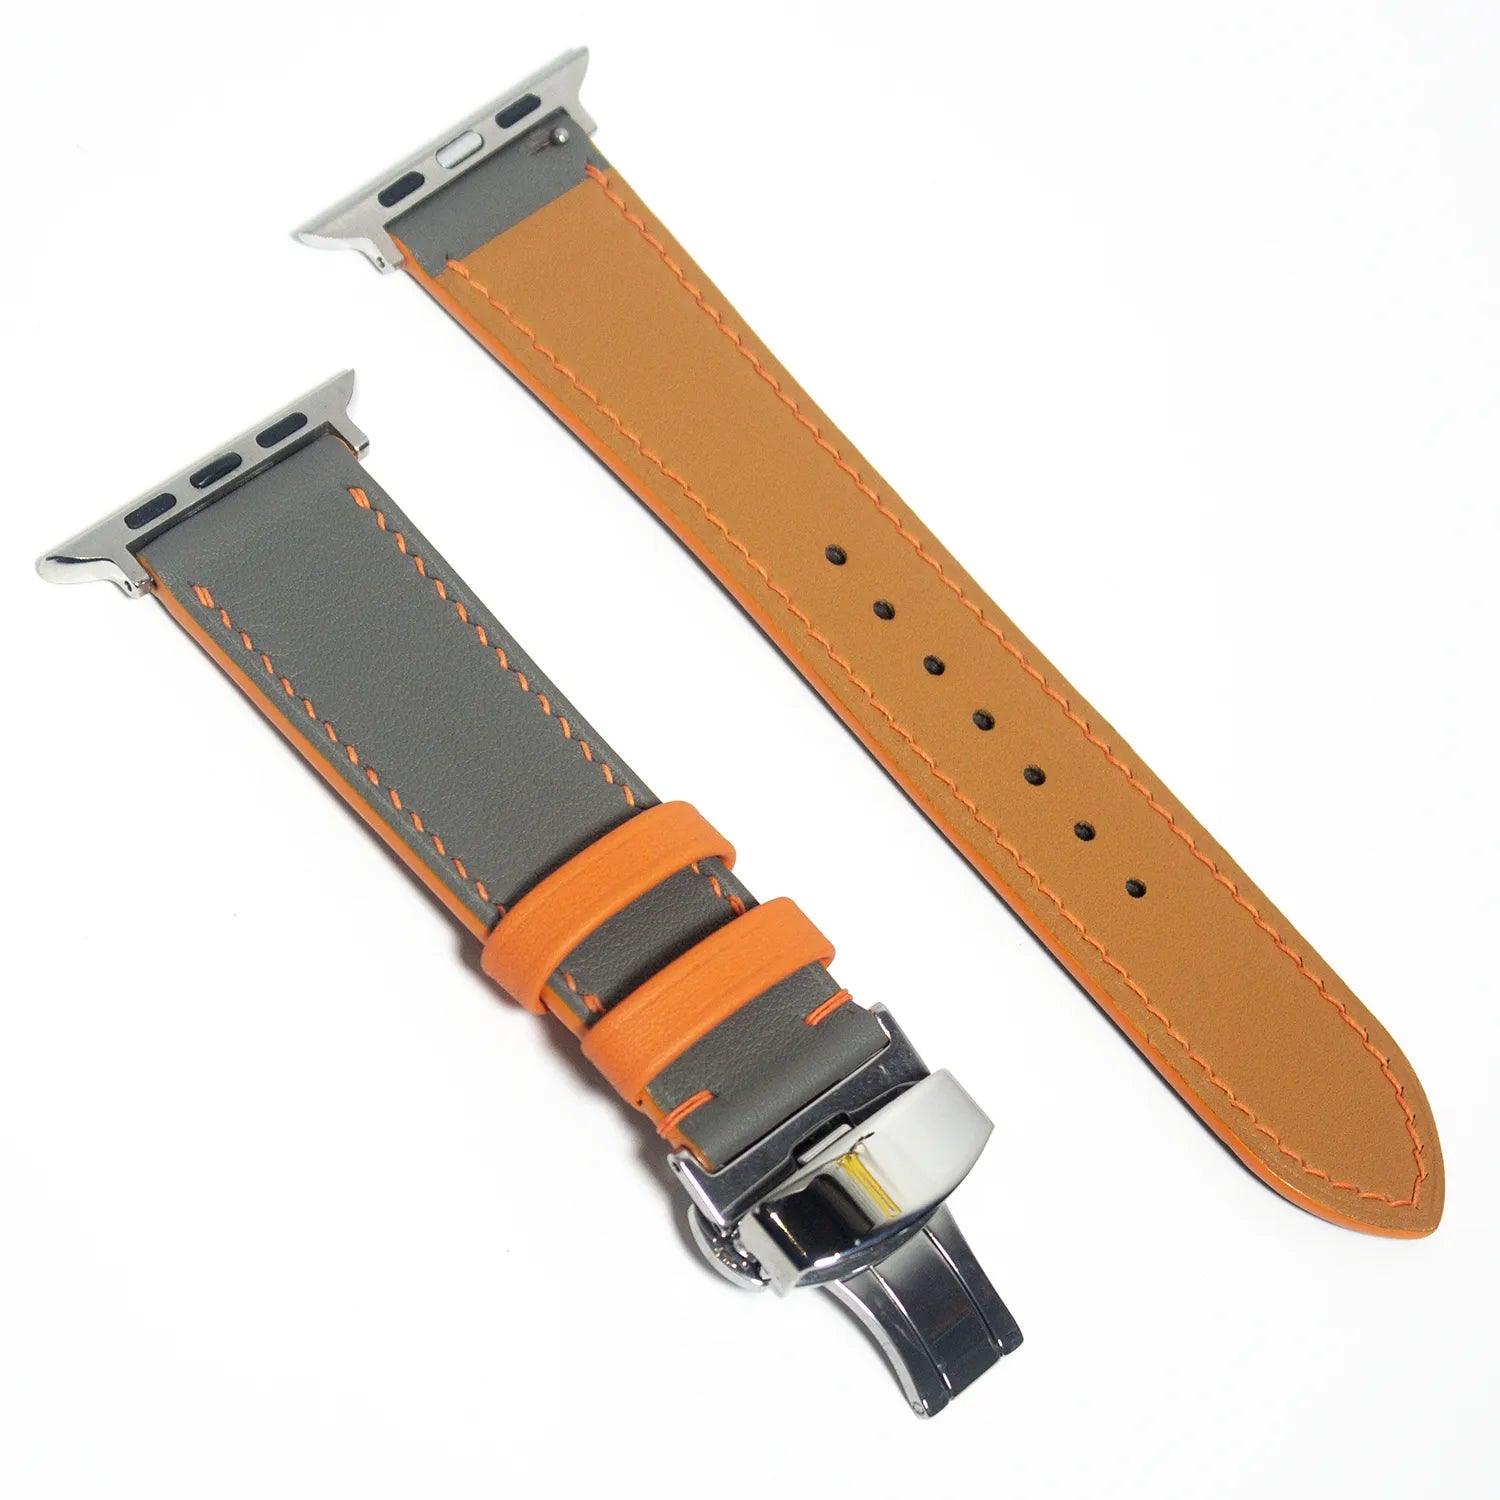 Contemporary leather watch bands in gray Swift leather, enhanced with eye-catching orange stitching.